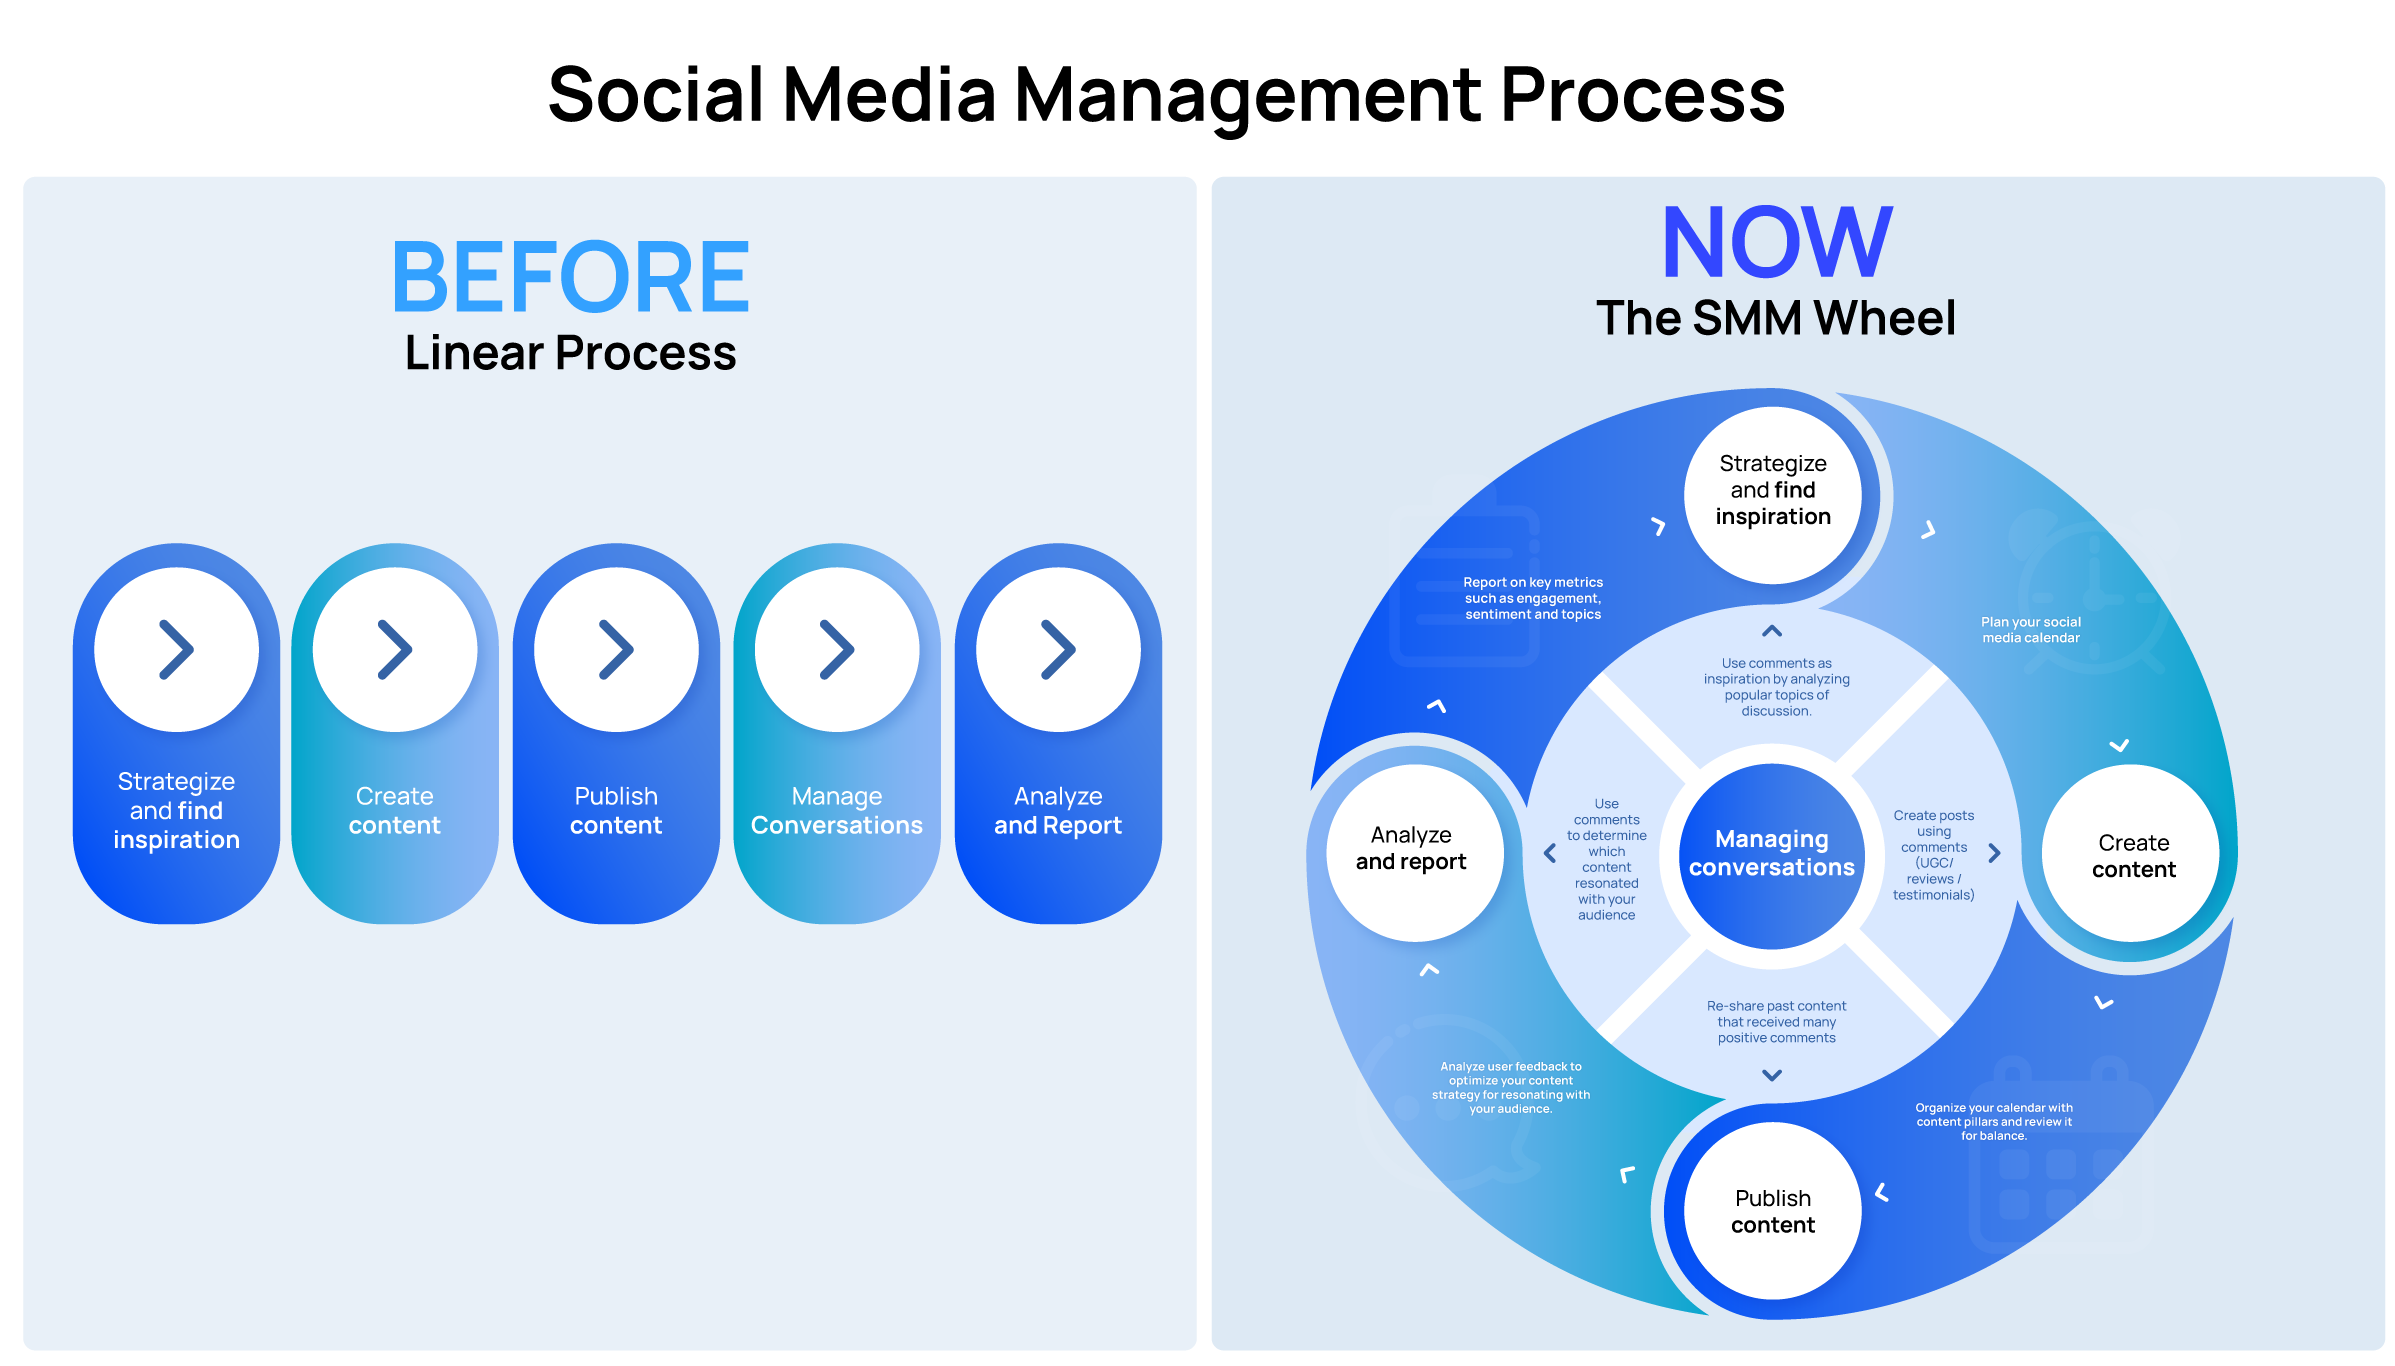 social-media-management-process-before-after-now